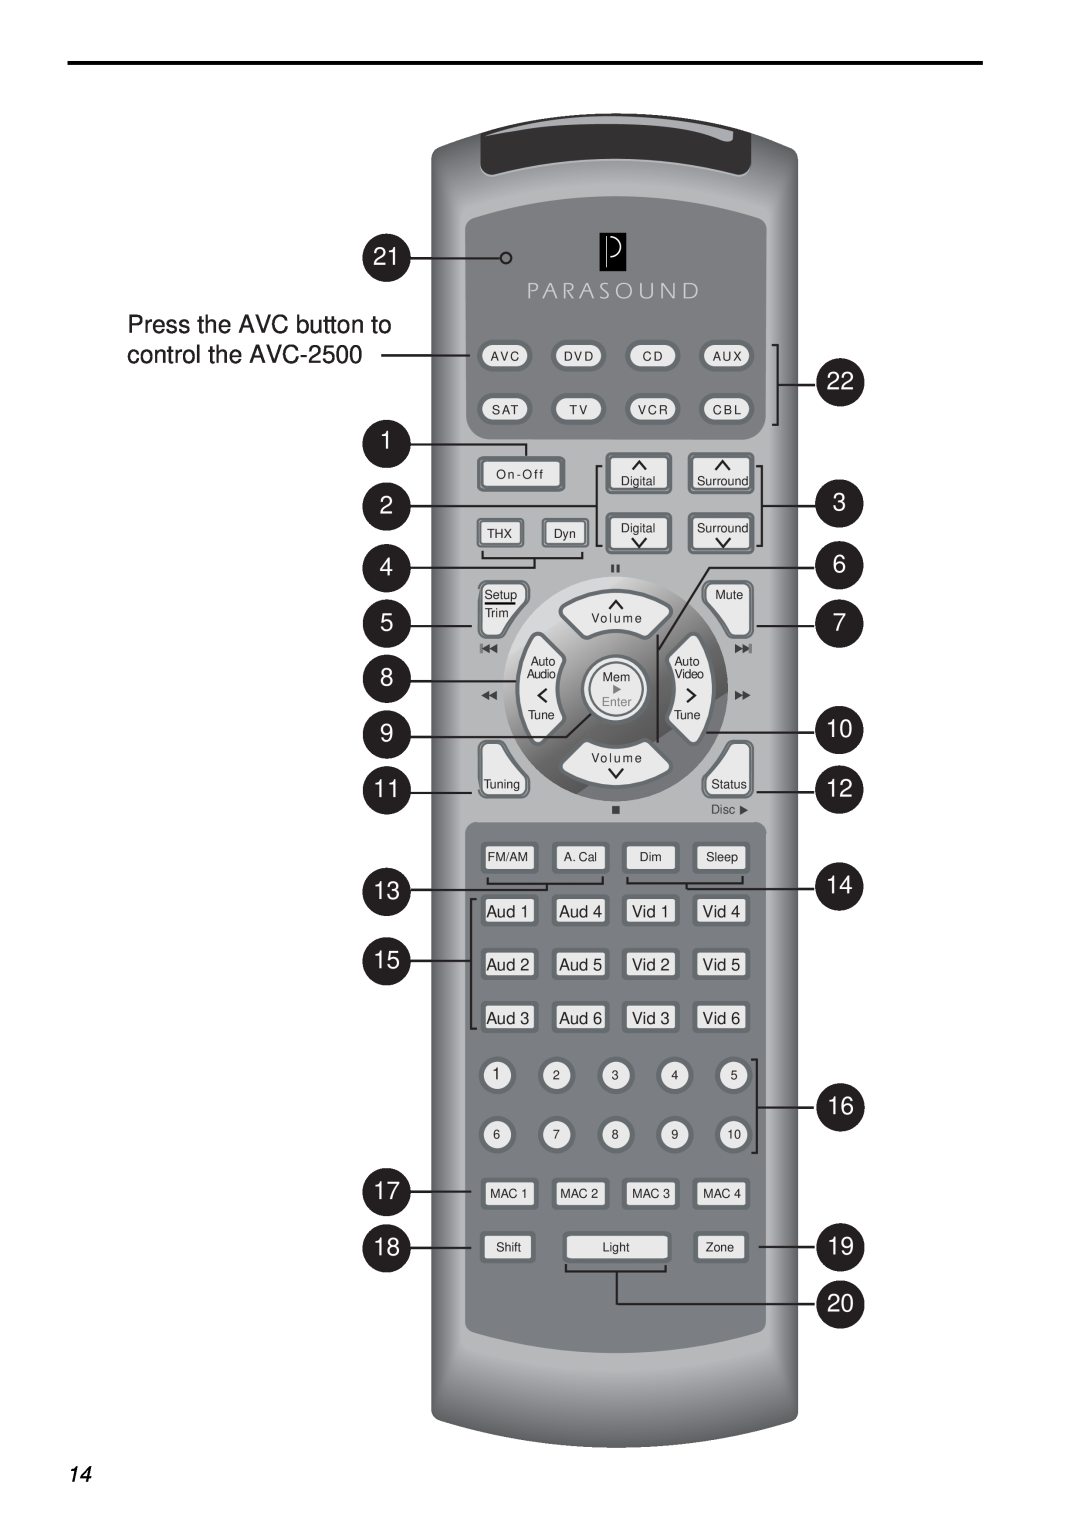 Parasound owner manual Press the AVC button to control the AVC-2500, 13 15, 14 16 